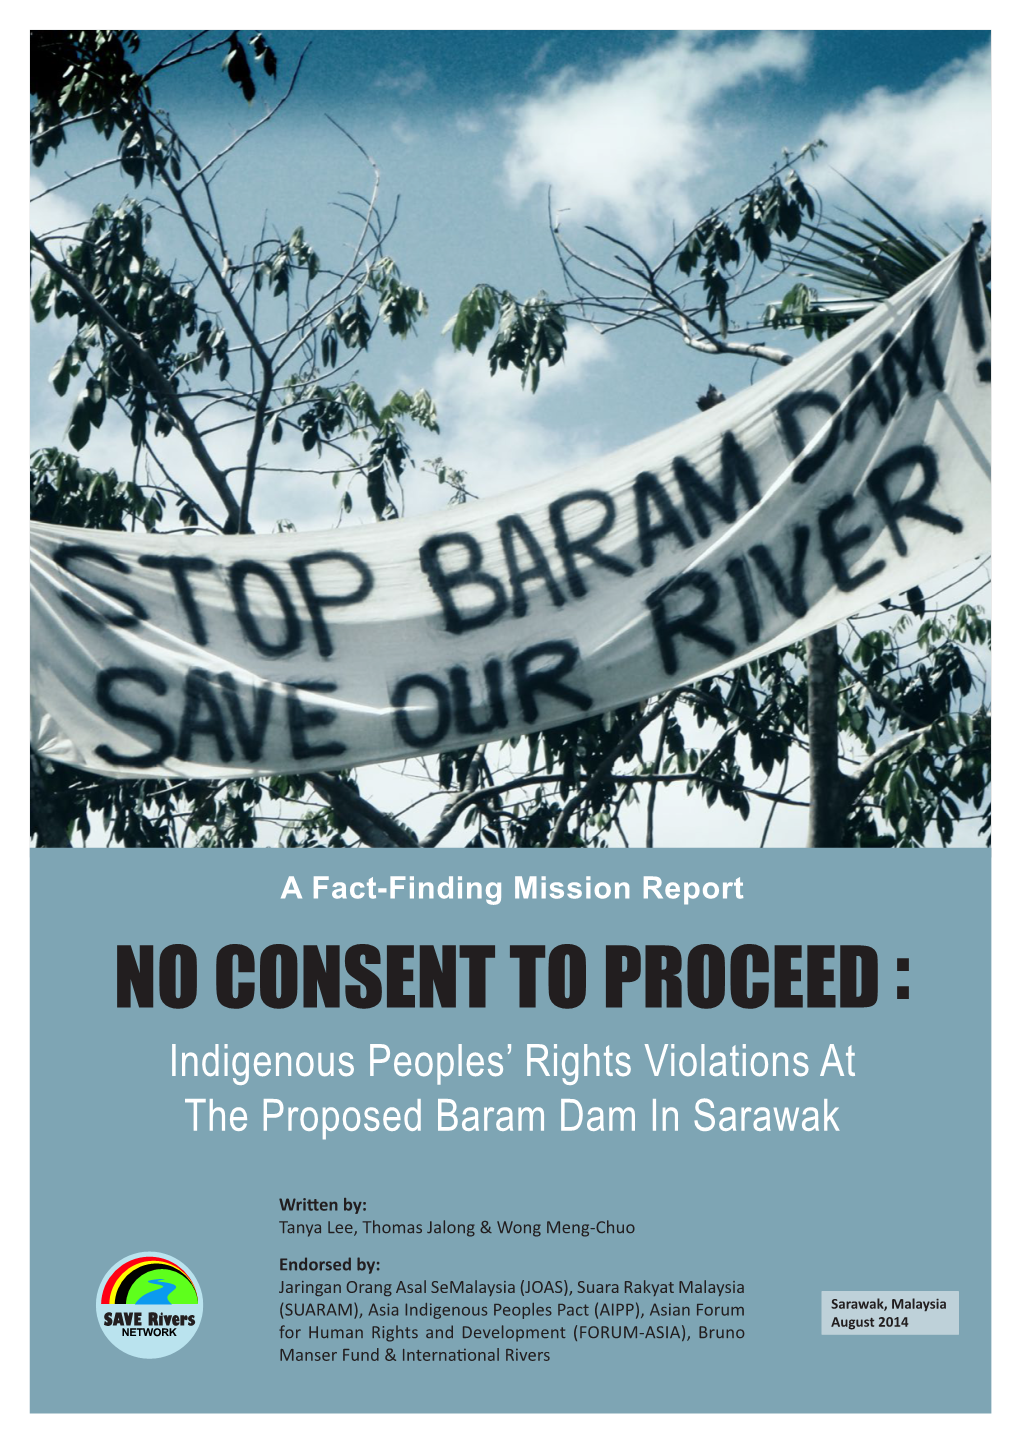 NO CONSENT to PROCEED : Indigenous Peoples’ Rights Violations at the Proposed Baram Dam in Sarawak